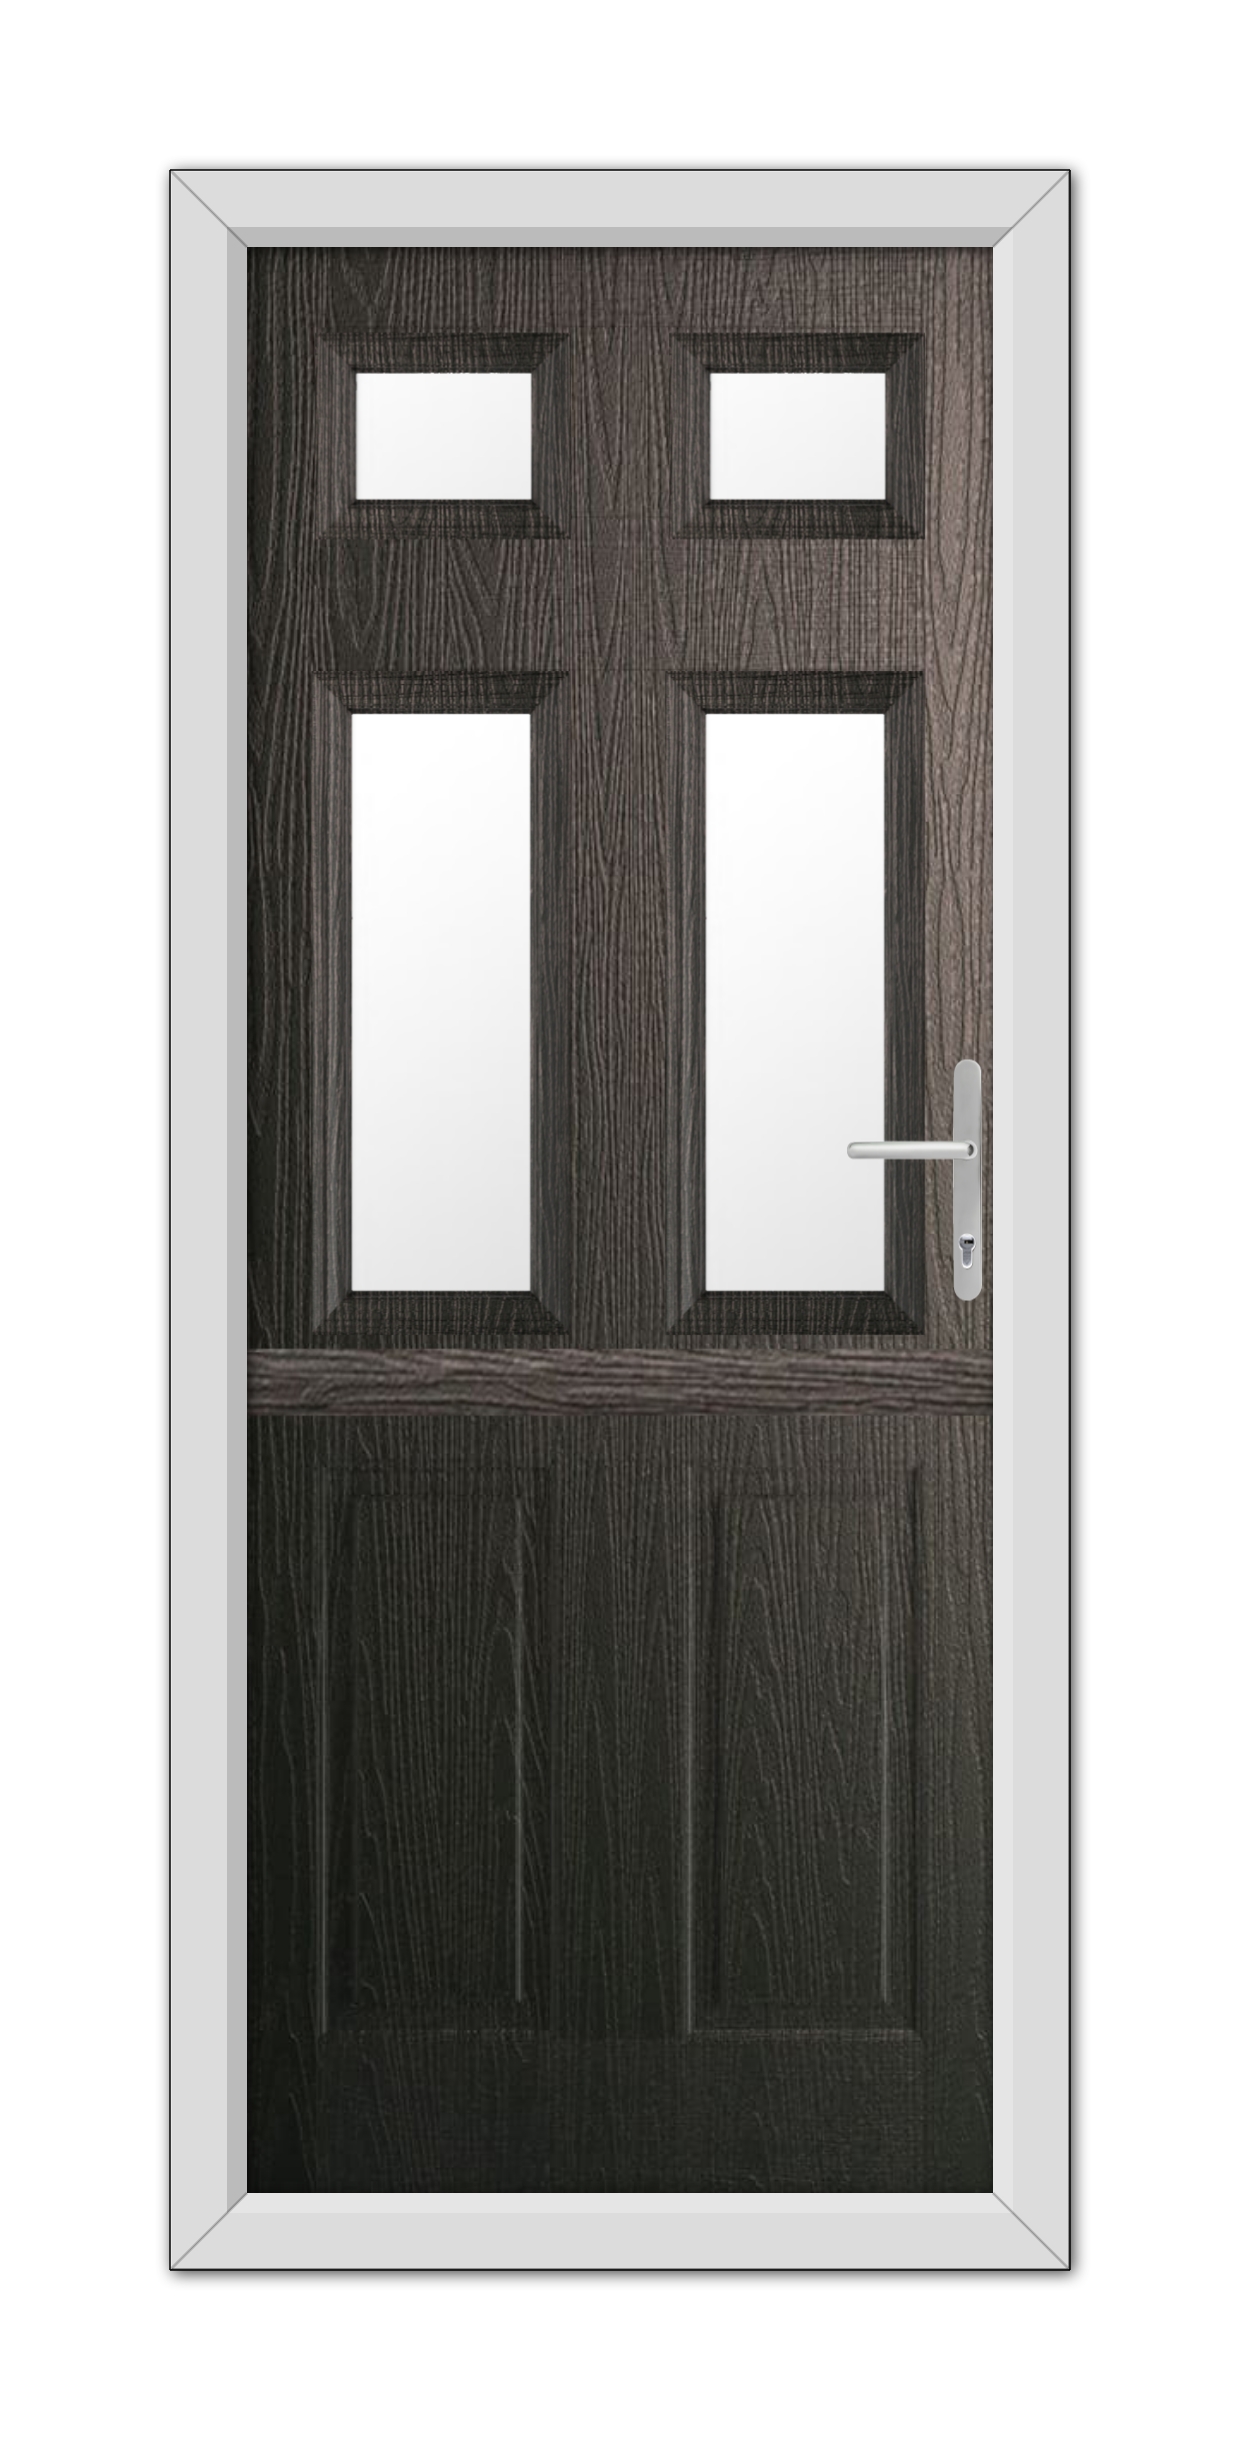 A modern Schwarzbraun Middleton Glazed 4 Stable Composite Door 48mm Timber Core with a metal handle, featuring two vertical rectangular windows and two small square windows at the top.